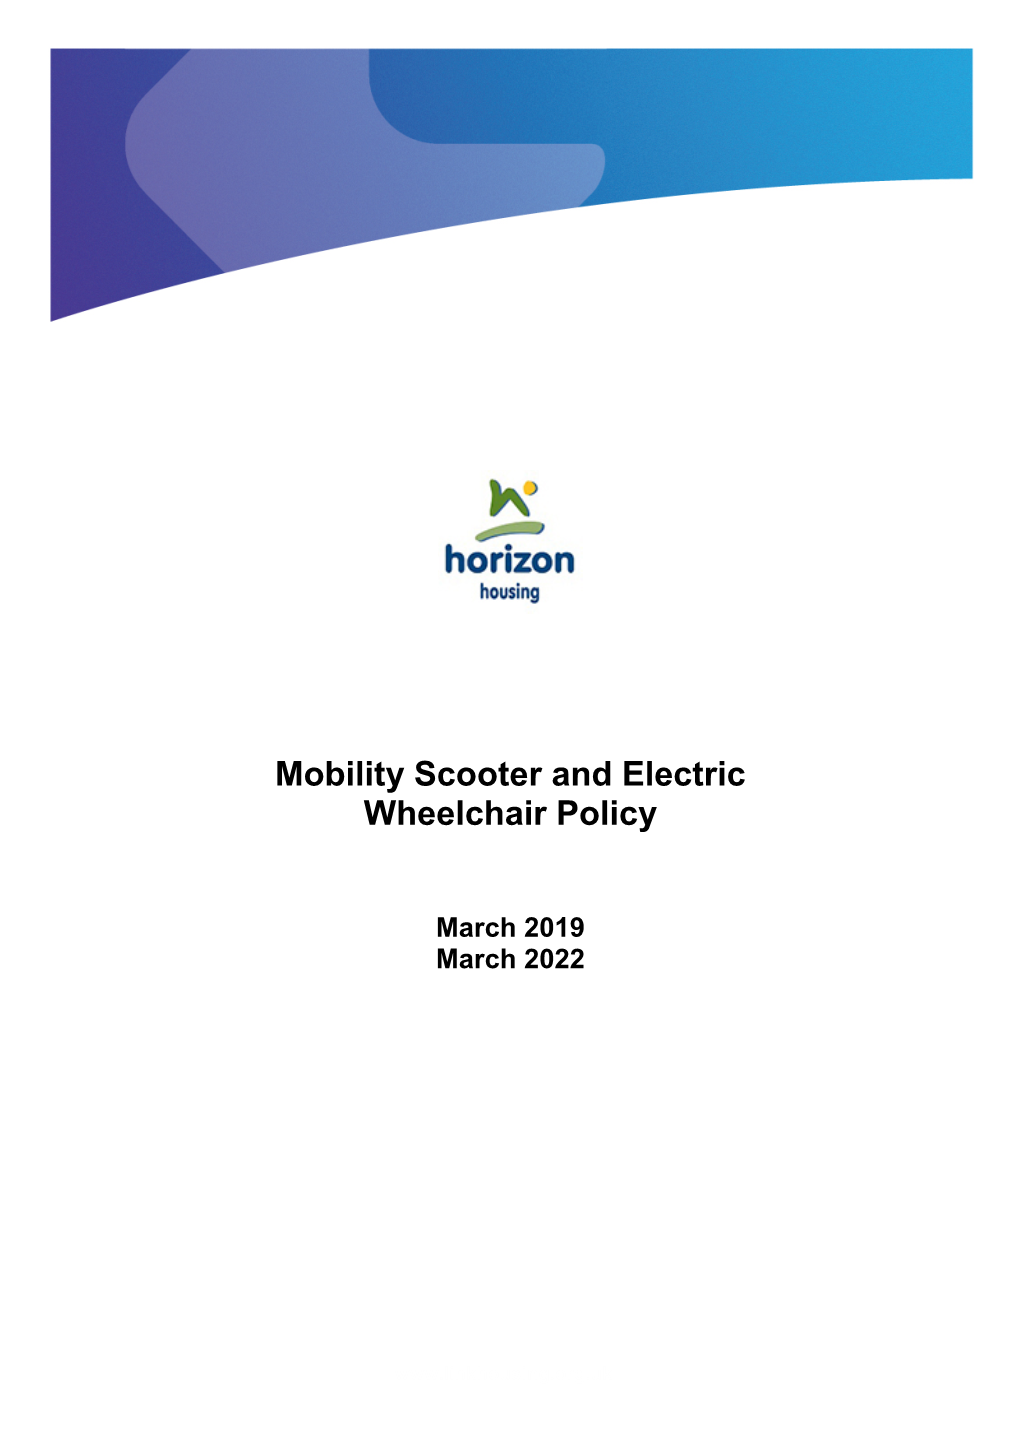 Mobility Scooter and Electric Wheelchair Policy